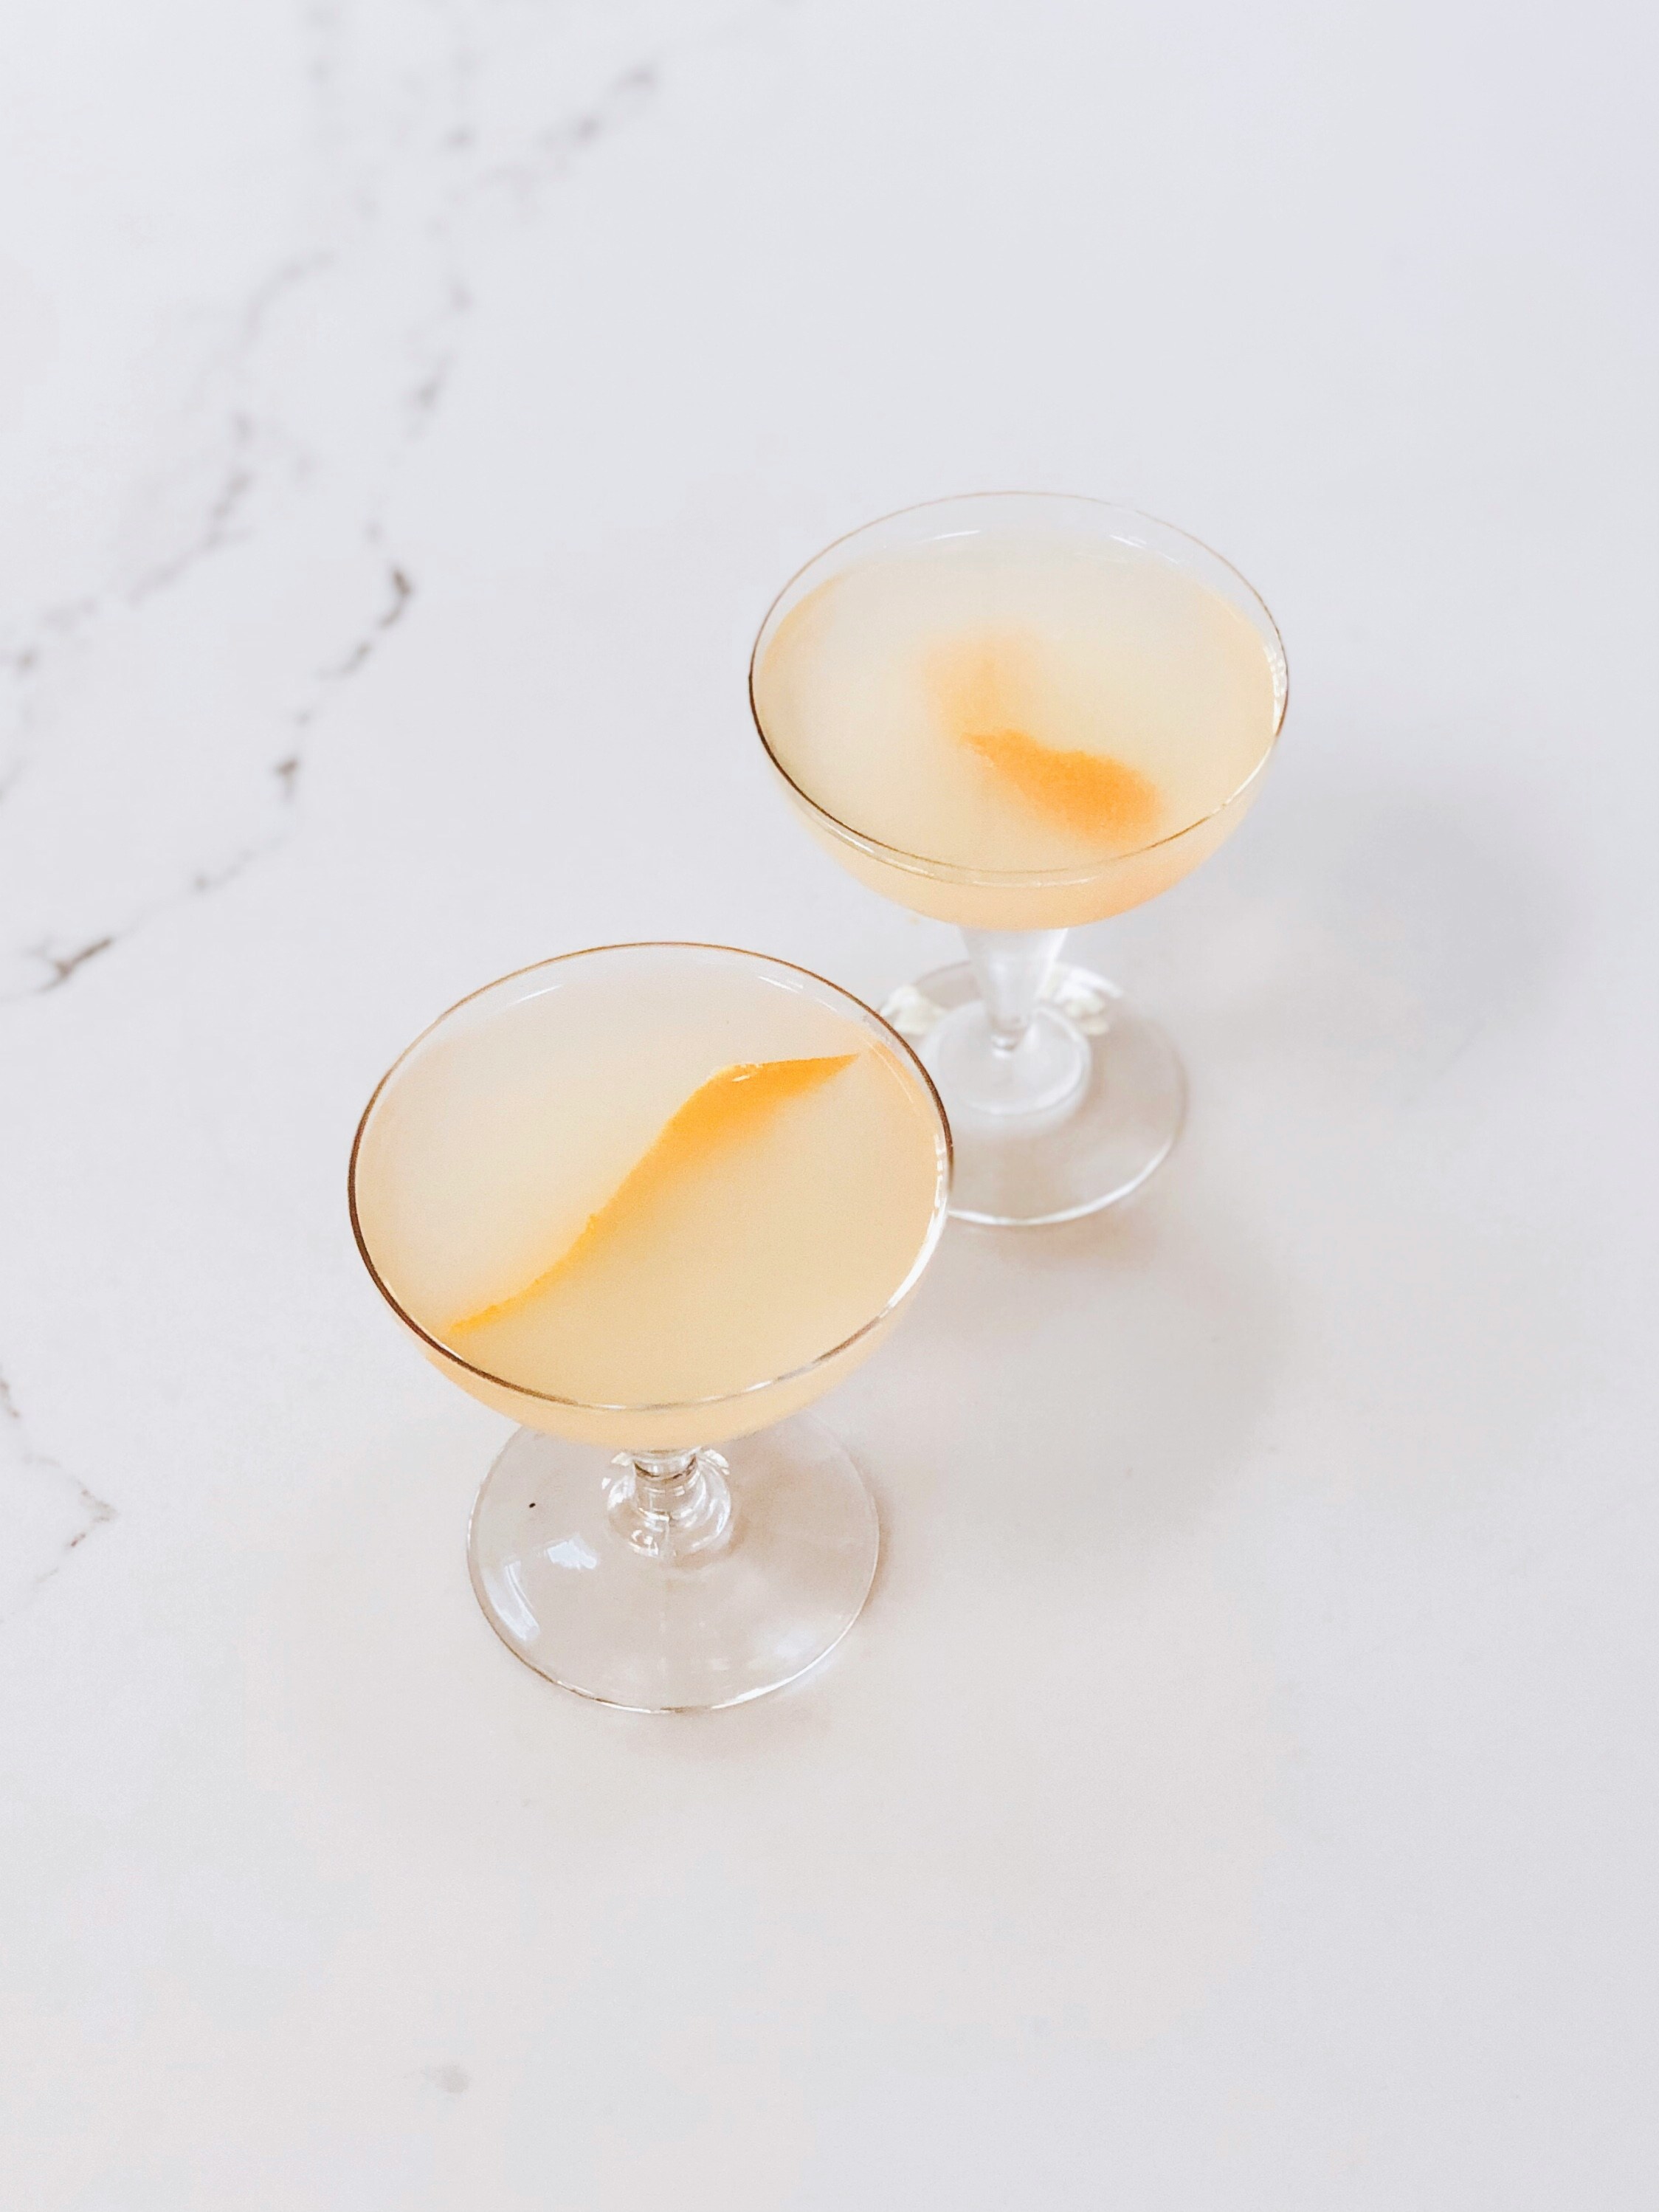 The Tovarich Cocktail: Unravelling the Soviet-inspired Elegance